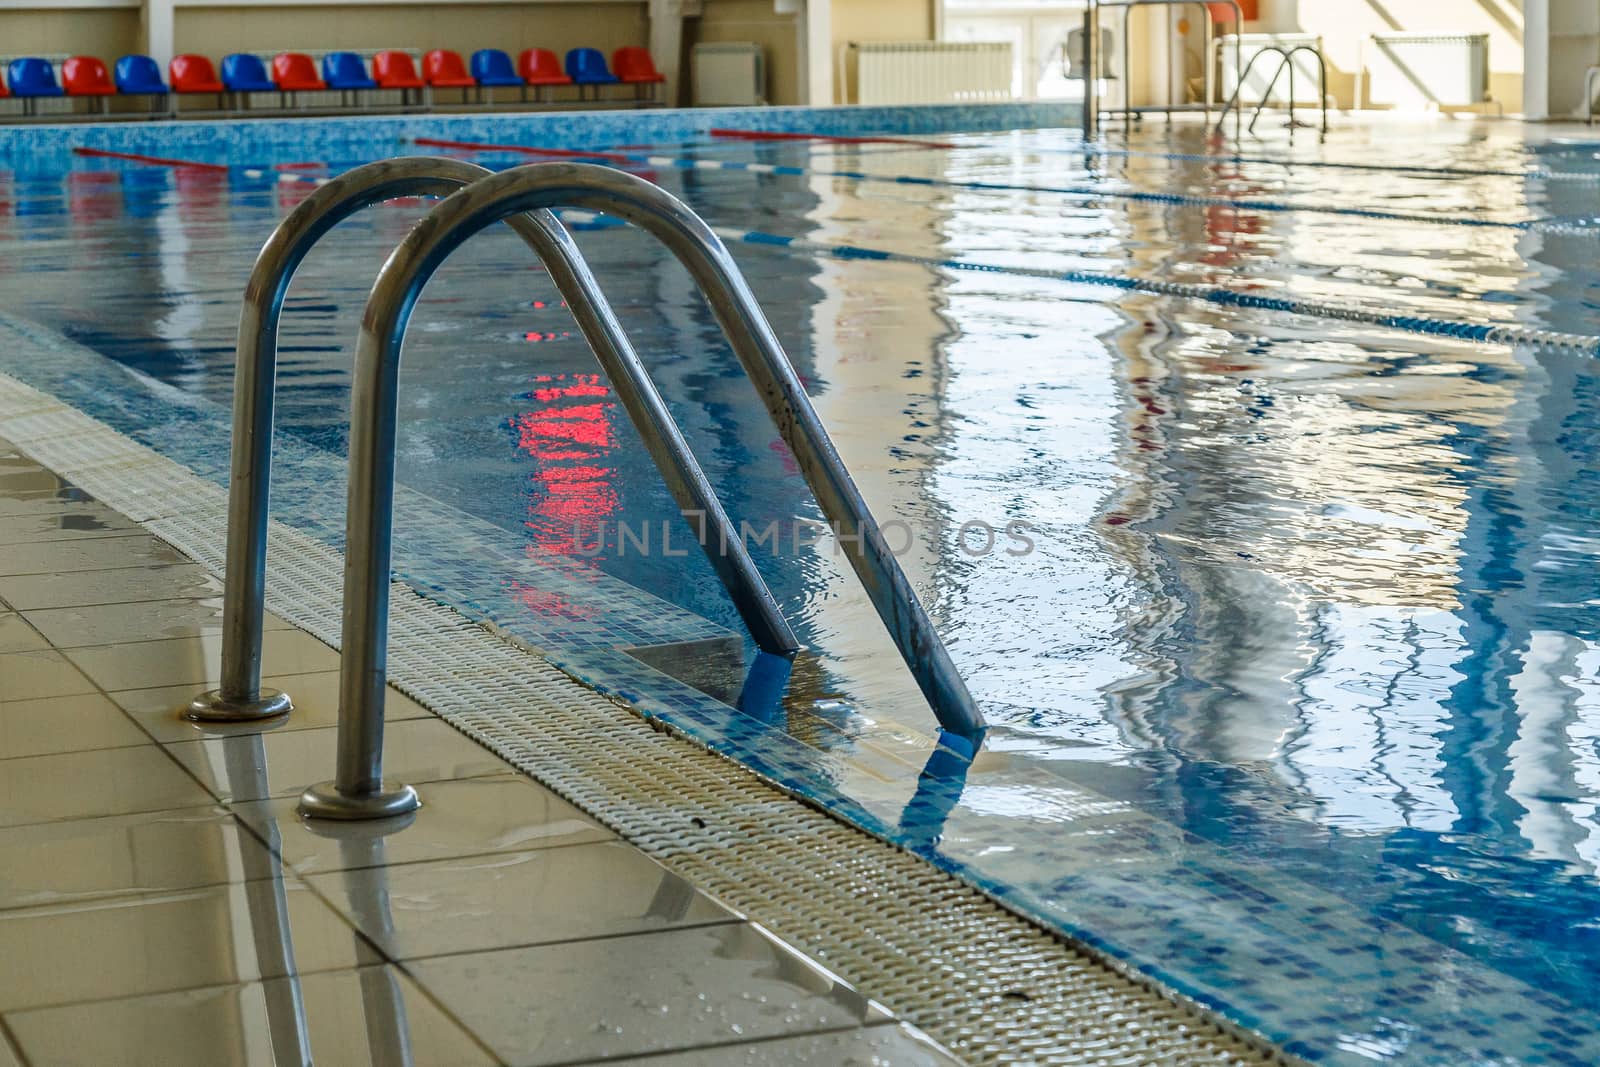 metal ladder for launching into the water in the pool